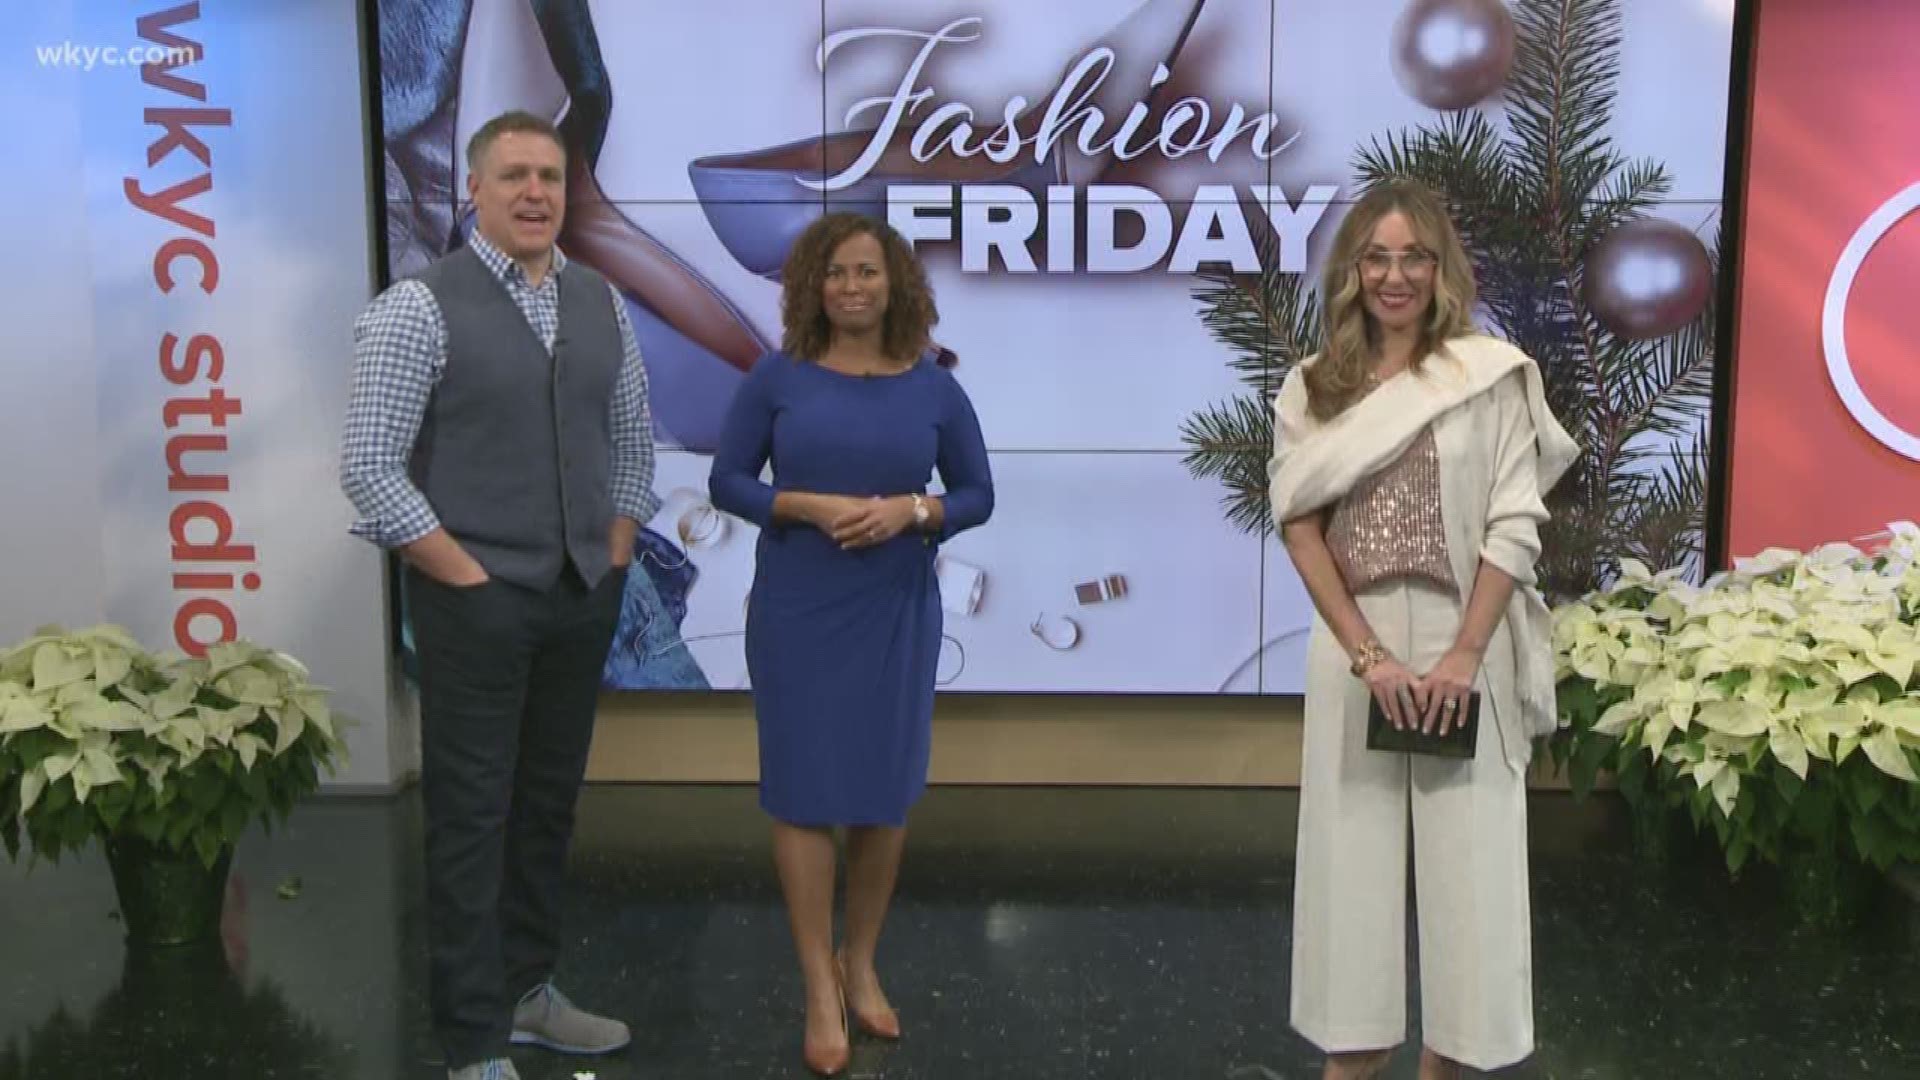 Hallie Abrams of 'The Wardrobe Consultant' stops by the studio to share three different looks for holiday parties, including casual and dressy options.